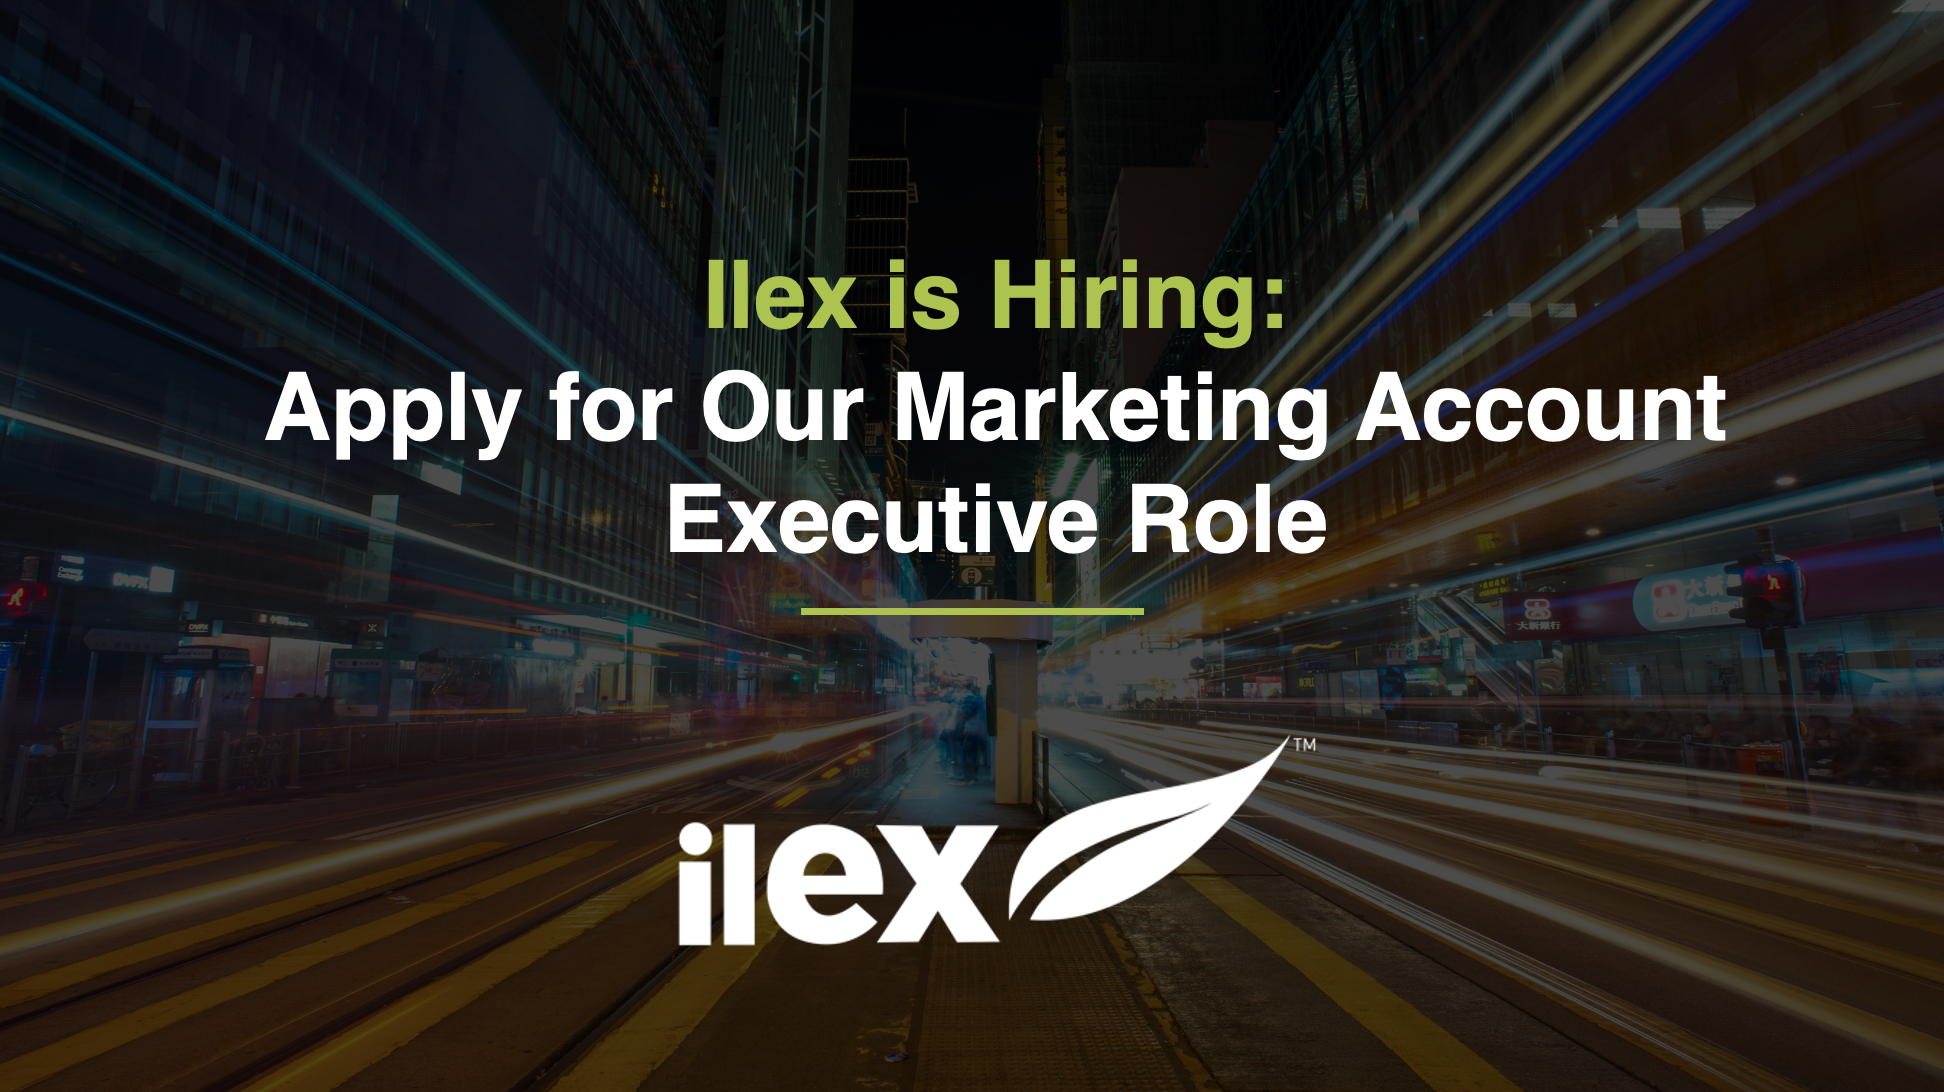 Ilex is Hiring: Apply for Our Marketing Account Executive Role